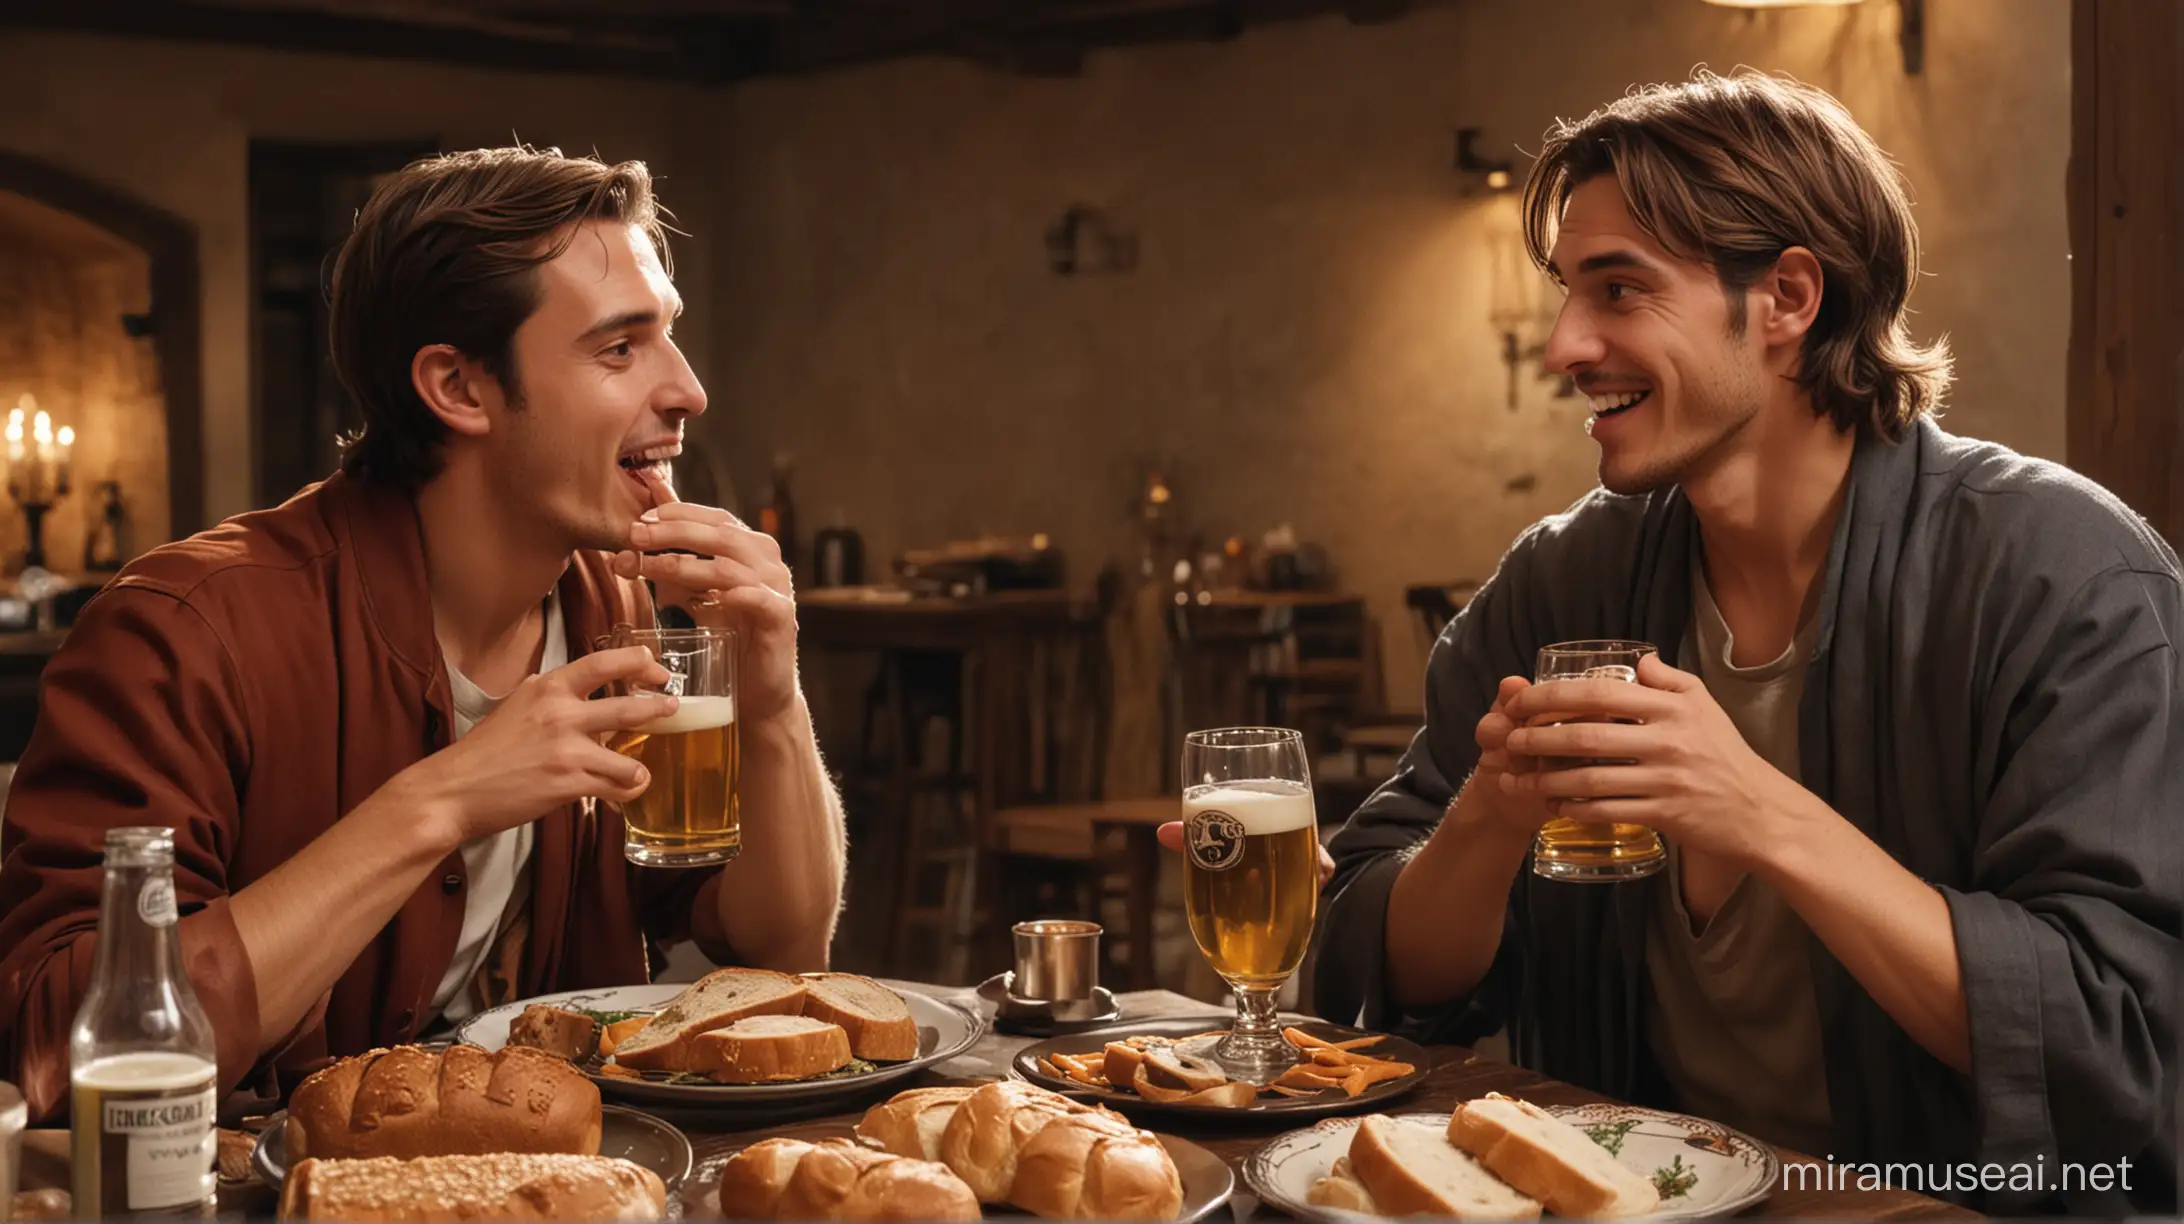 Hermes and Lugus Sharing a Feast of Beer and Bread